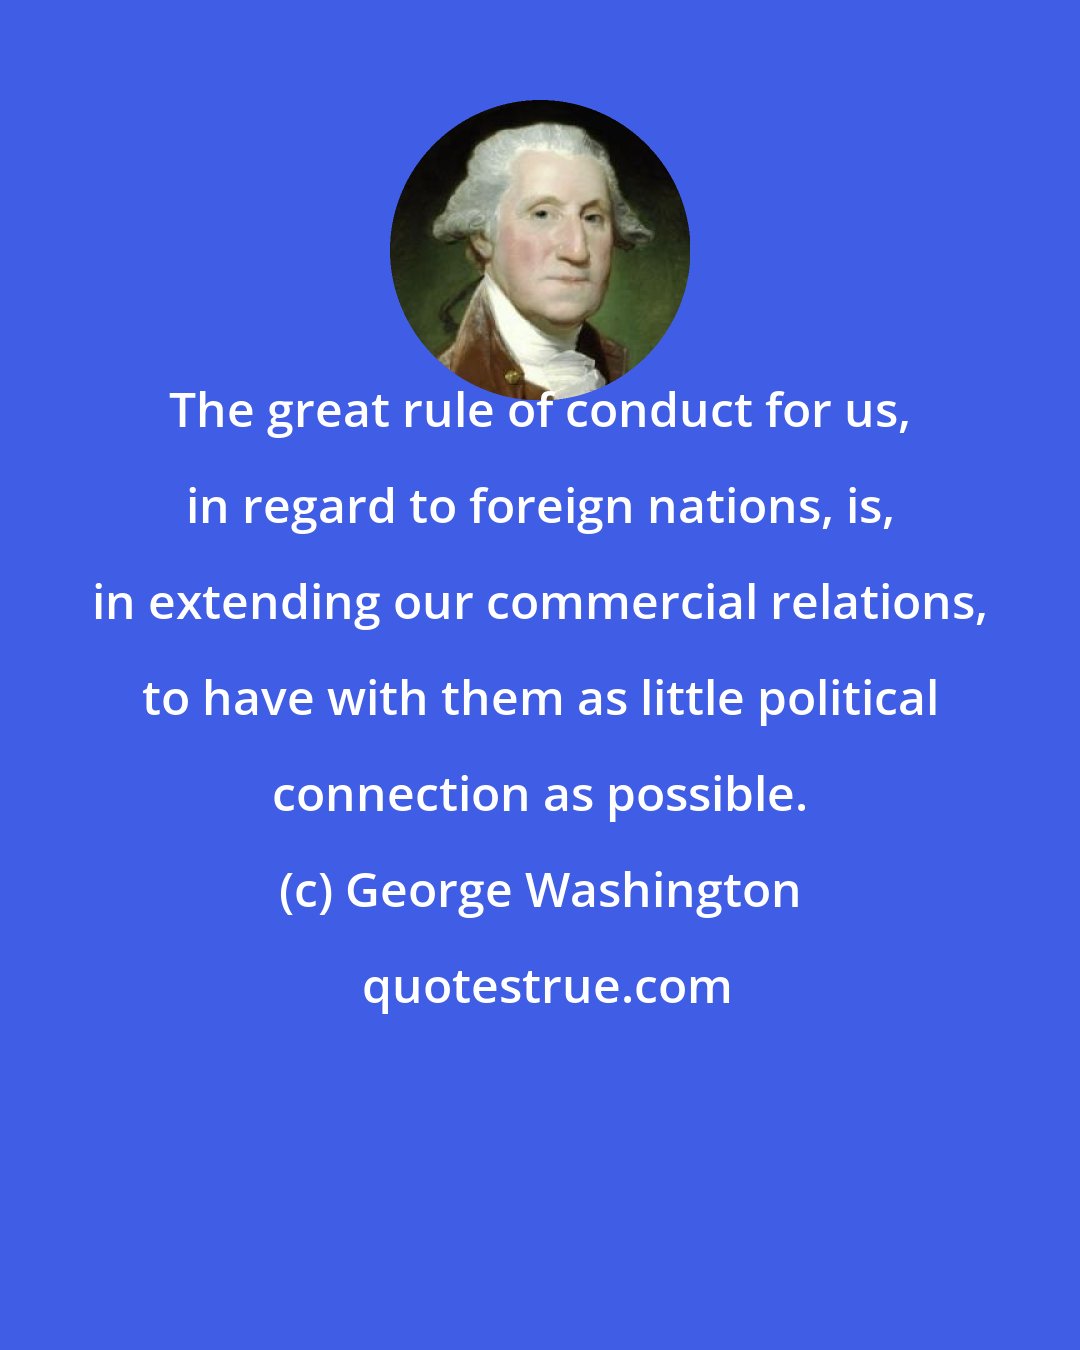 George Washington: The great rule of conduct for us, in regard to foreign nations, is, in extending our commercial relations, to have with them as little political connection as possible.